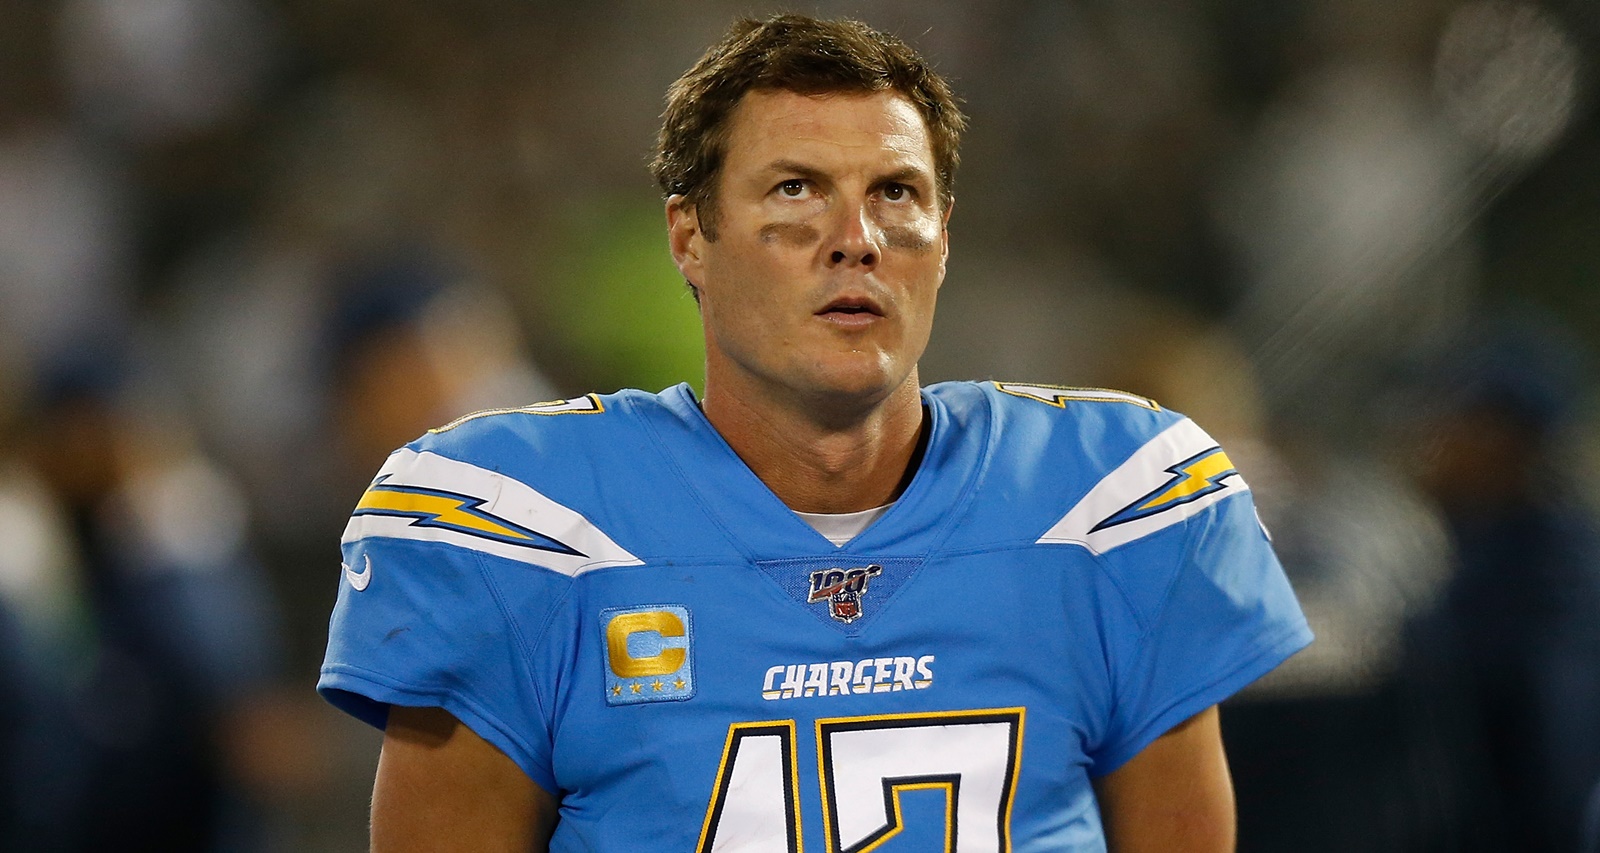 Philip Rivers’ Wife: Tiffany Rivers Wiki, Age, Kids and Facts To Know